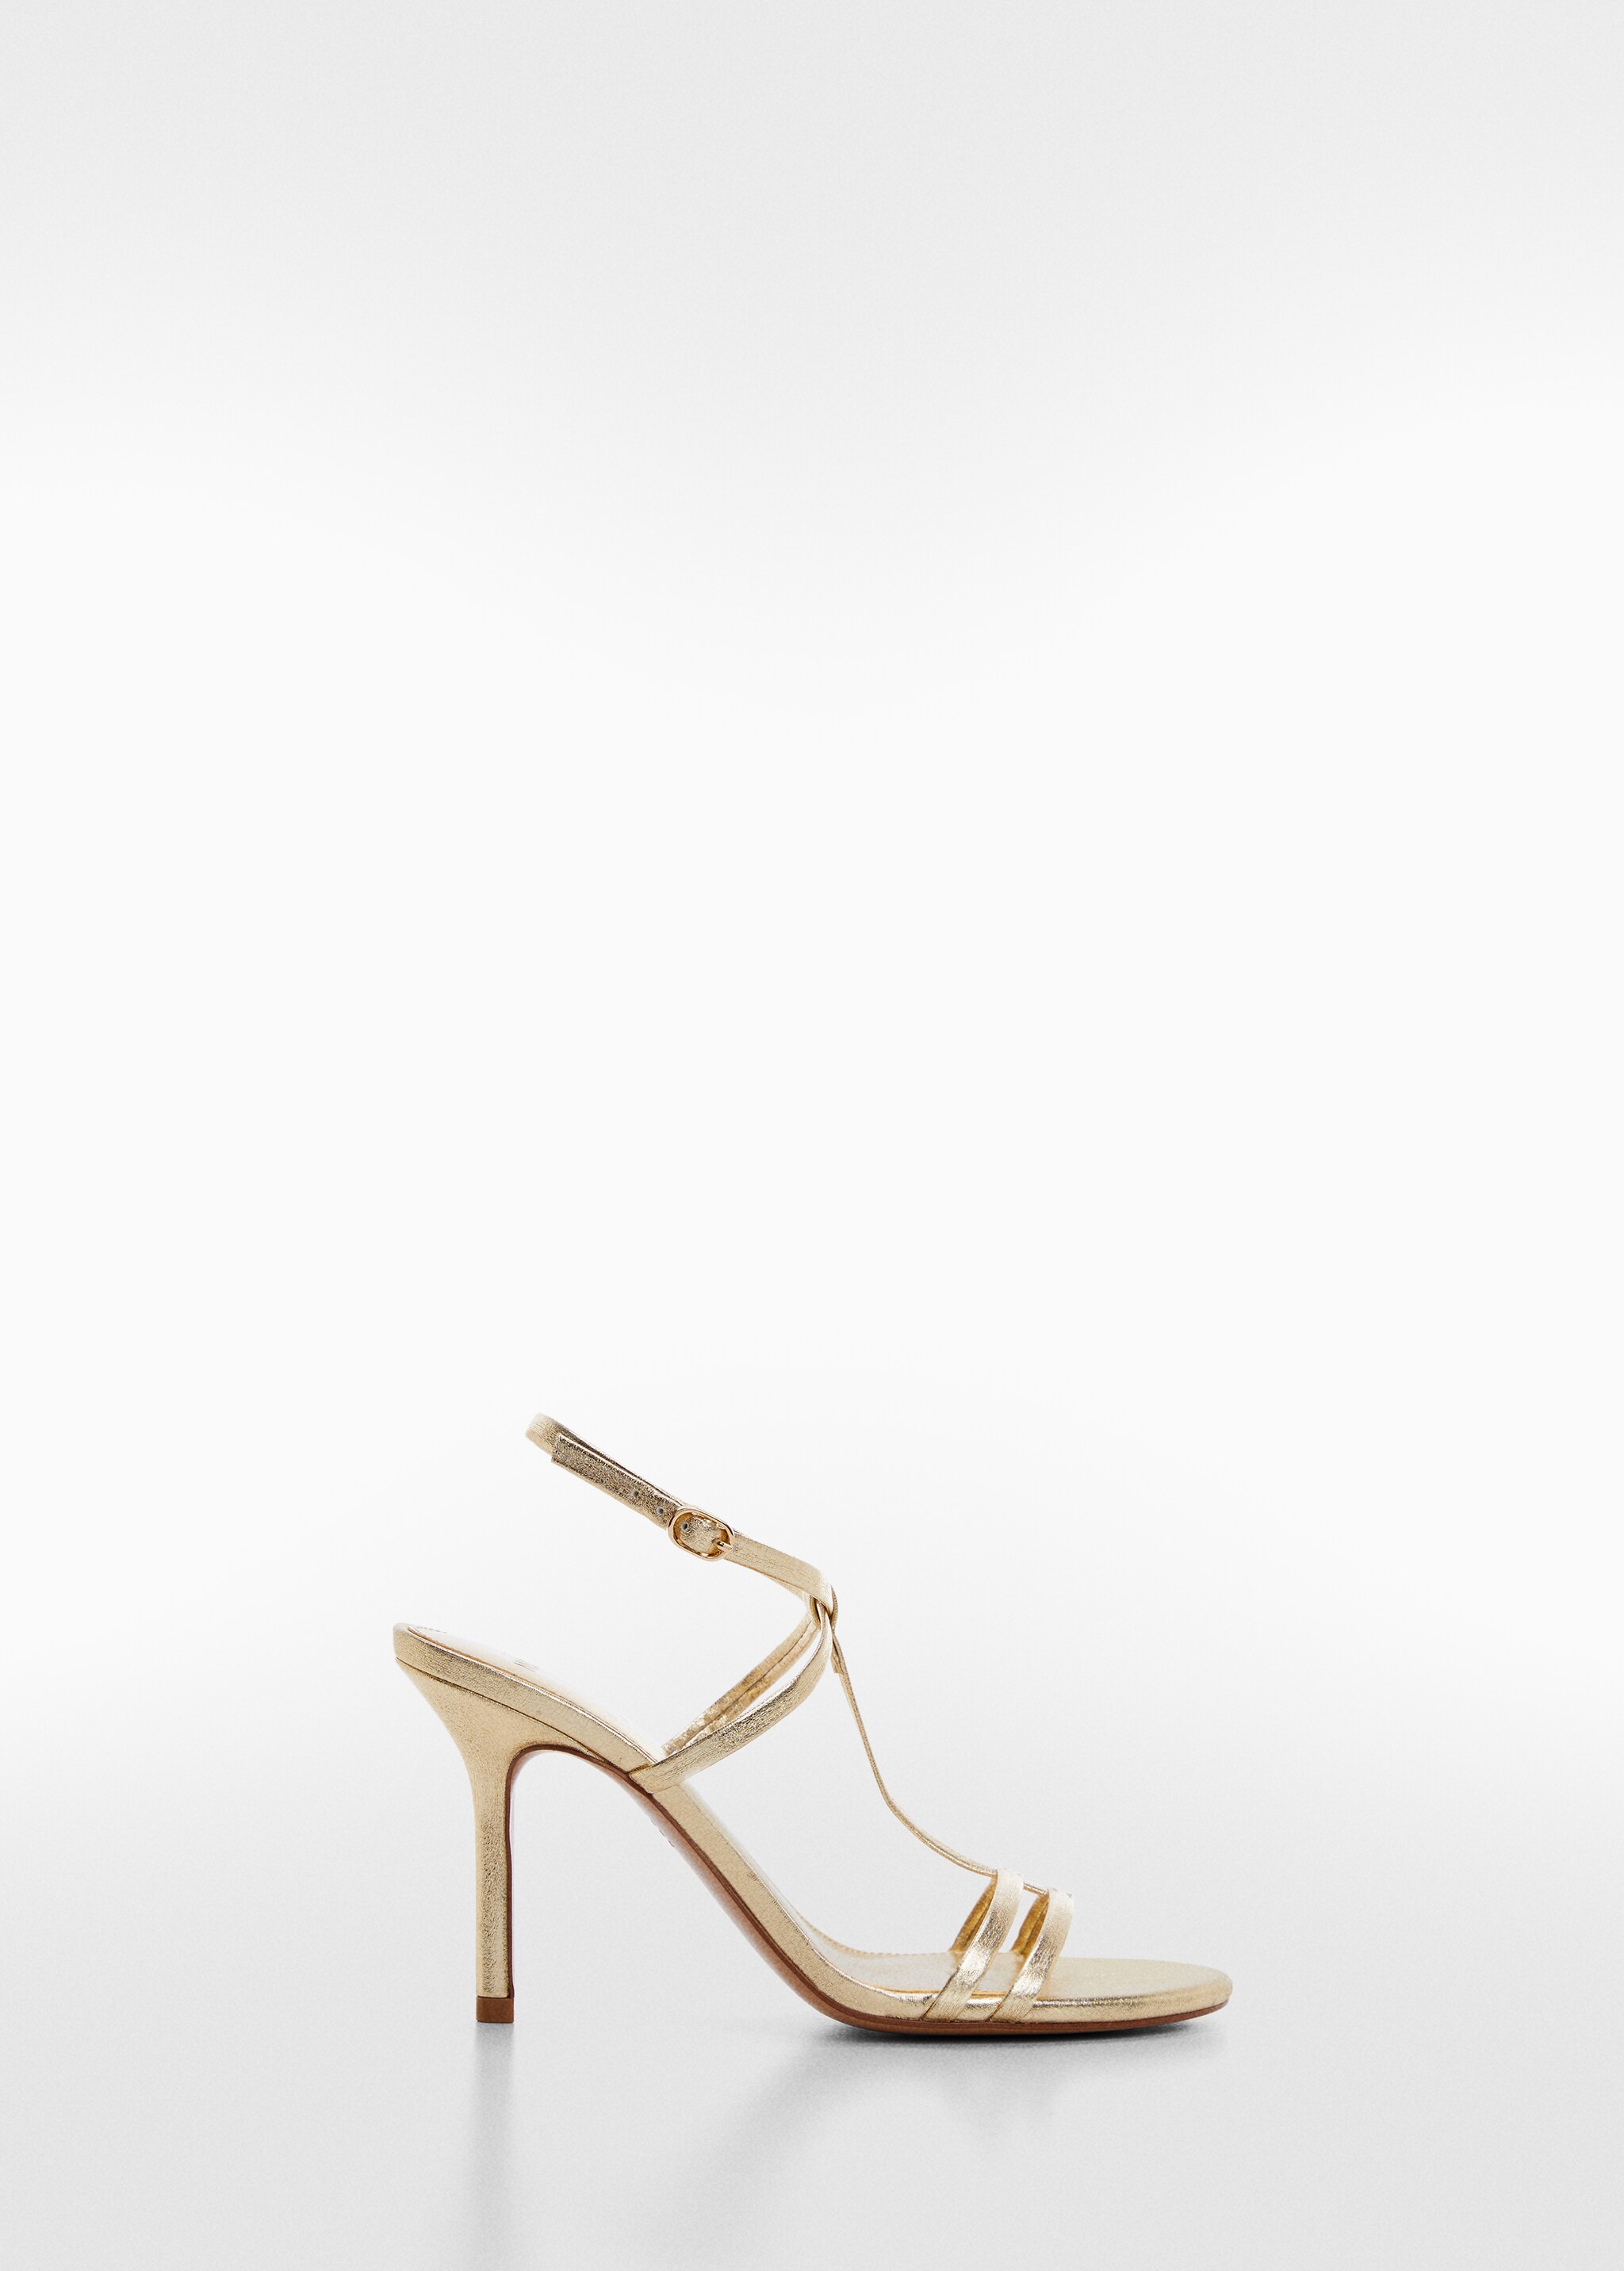 Ankle-cuff heeled sandals - Article without model